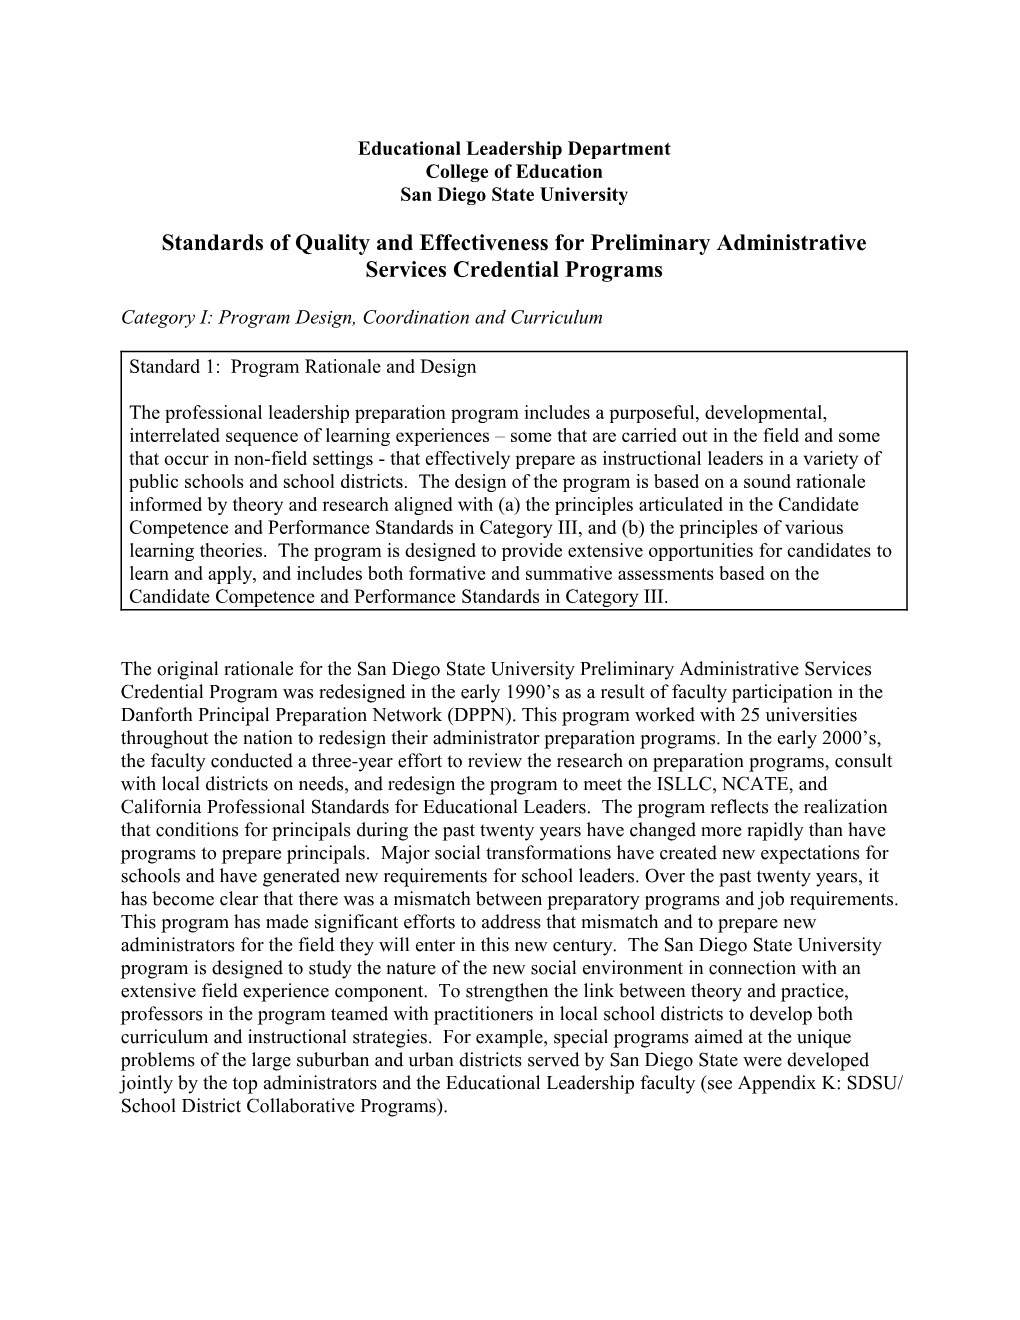 Standards of Quality and Effectiveness for Preliminary Administrative Services Credential